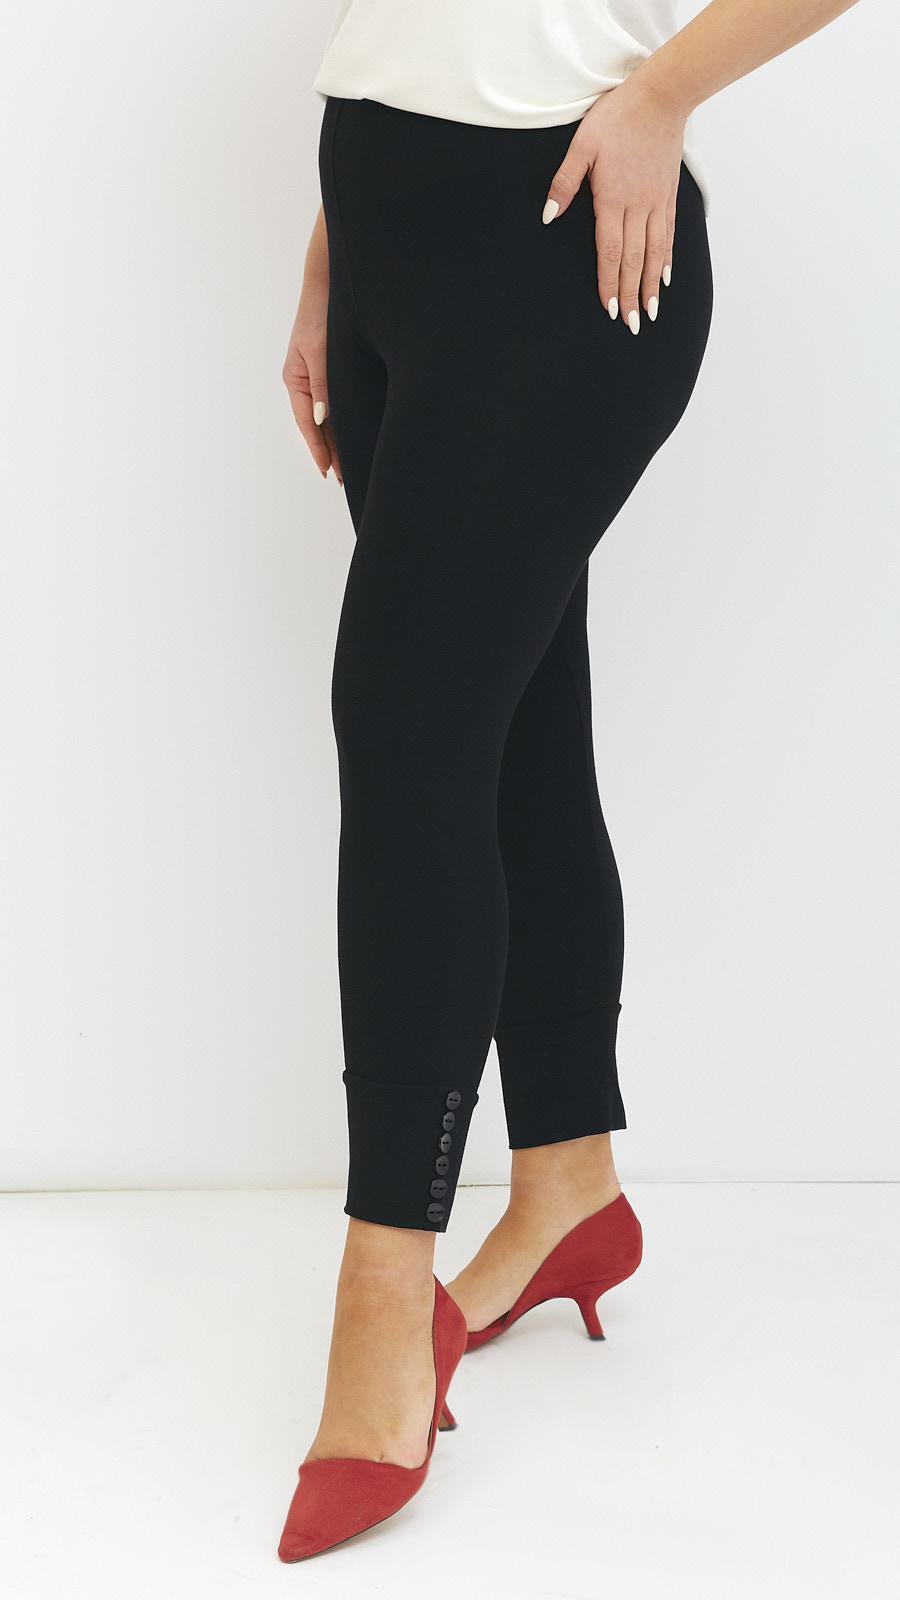 Black stylish comfortable leggings with buttons